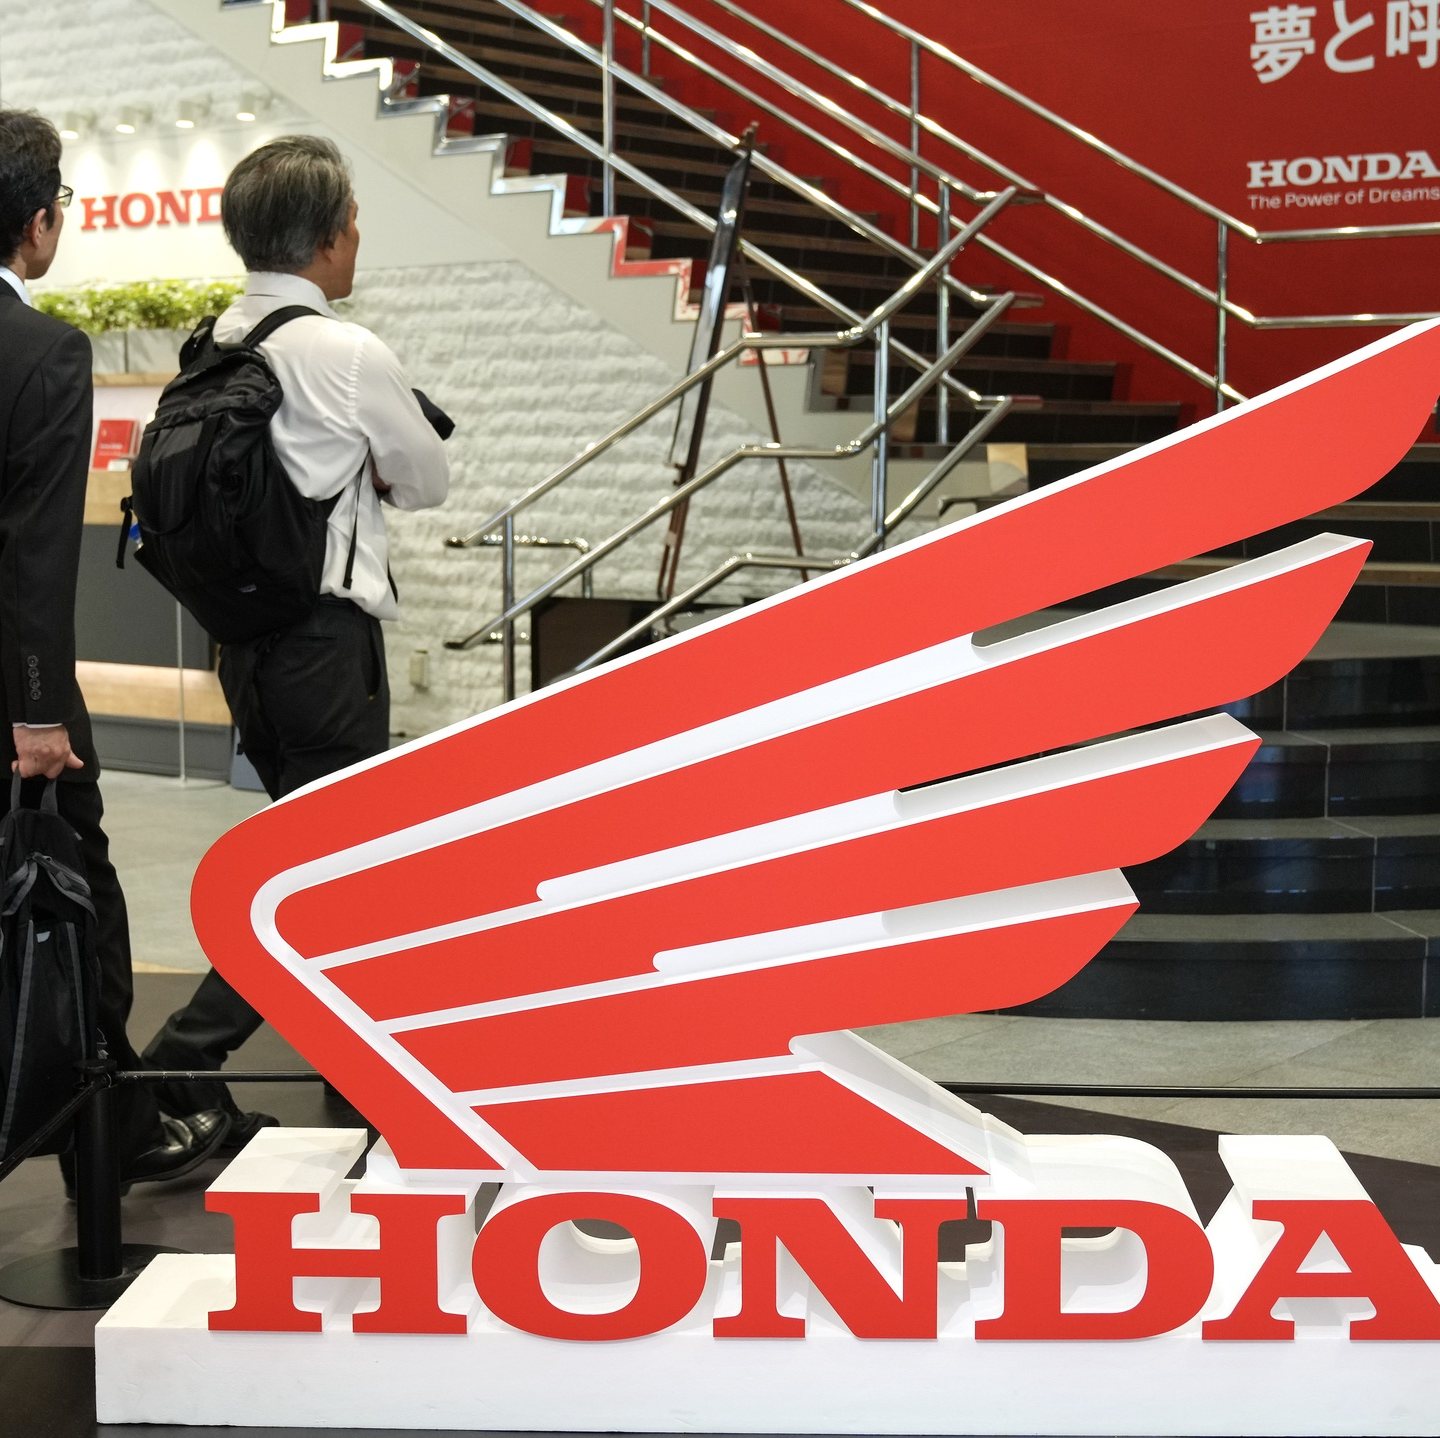 epa11330819 Visitors walk past the Honda Motorcycle logo at Honda Motor headquarters in Tokyo, Japan, 10 May 2024. Honda Motor announced its financial results for the fiscal year until 31 March 2024, with sales revenue increased by 20.8 percent to 20,428.8 billion Japanese Yen (around 121 billion Euro) from the 2023 fiscal year, due to among others an increased sales revenue in the automobile business. The company also reported an increased operating profit by 77.0 per cent to 1,381.9 billion yen (around 8 billion Euro) from the previous fiscal year.  EPA/KIMIMASA MAYAMA